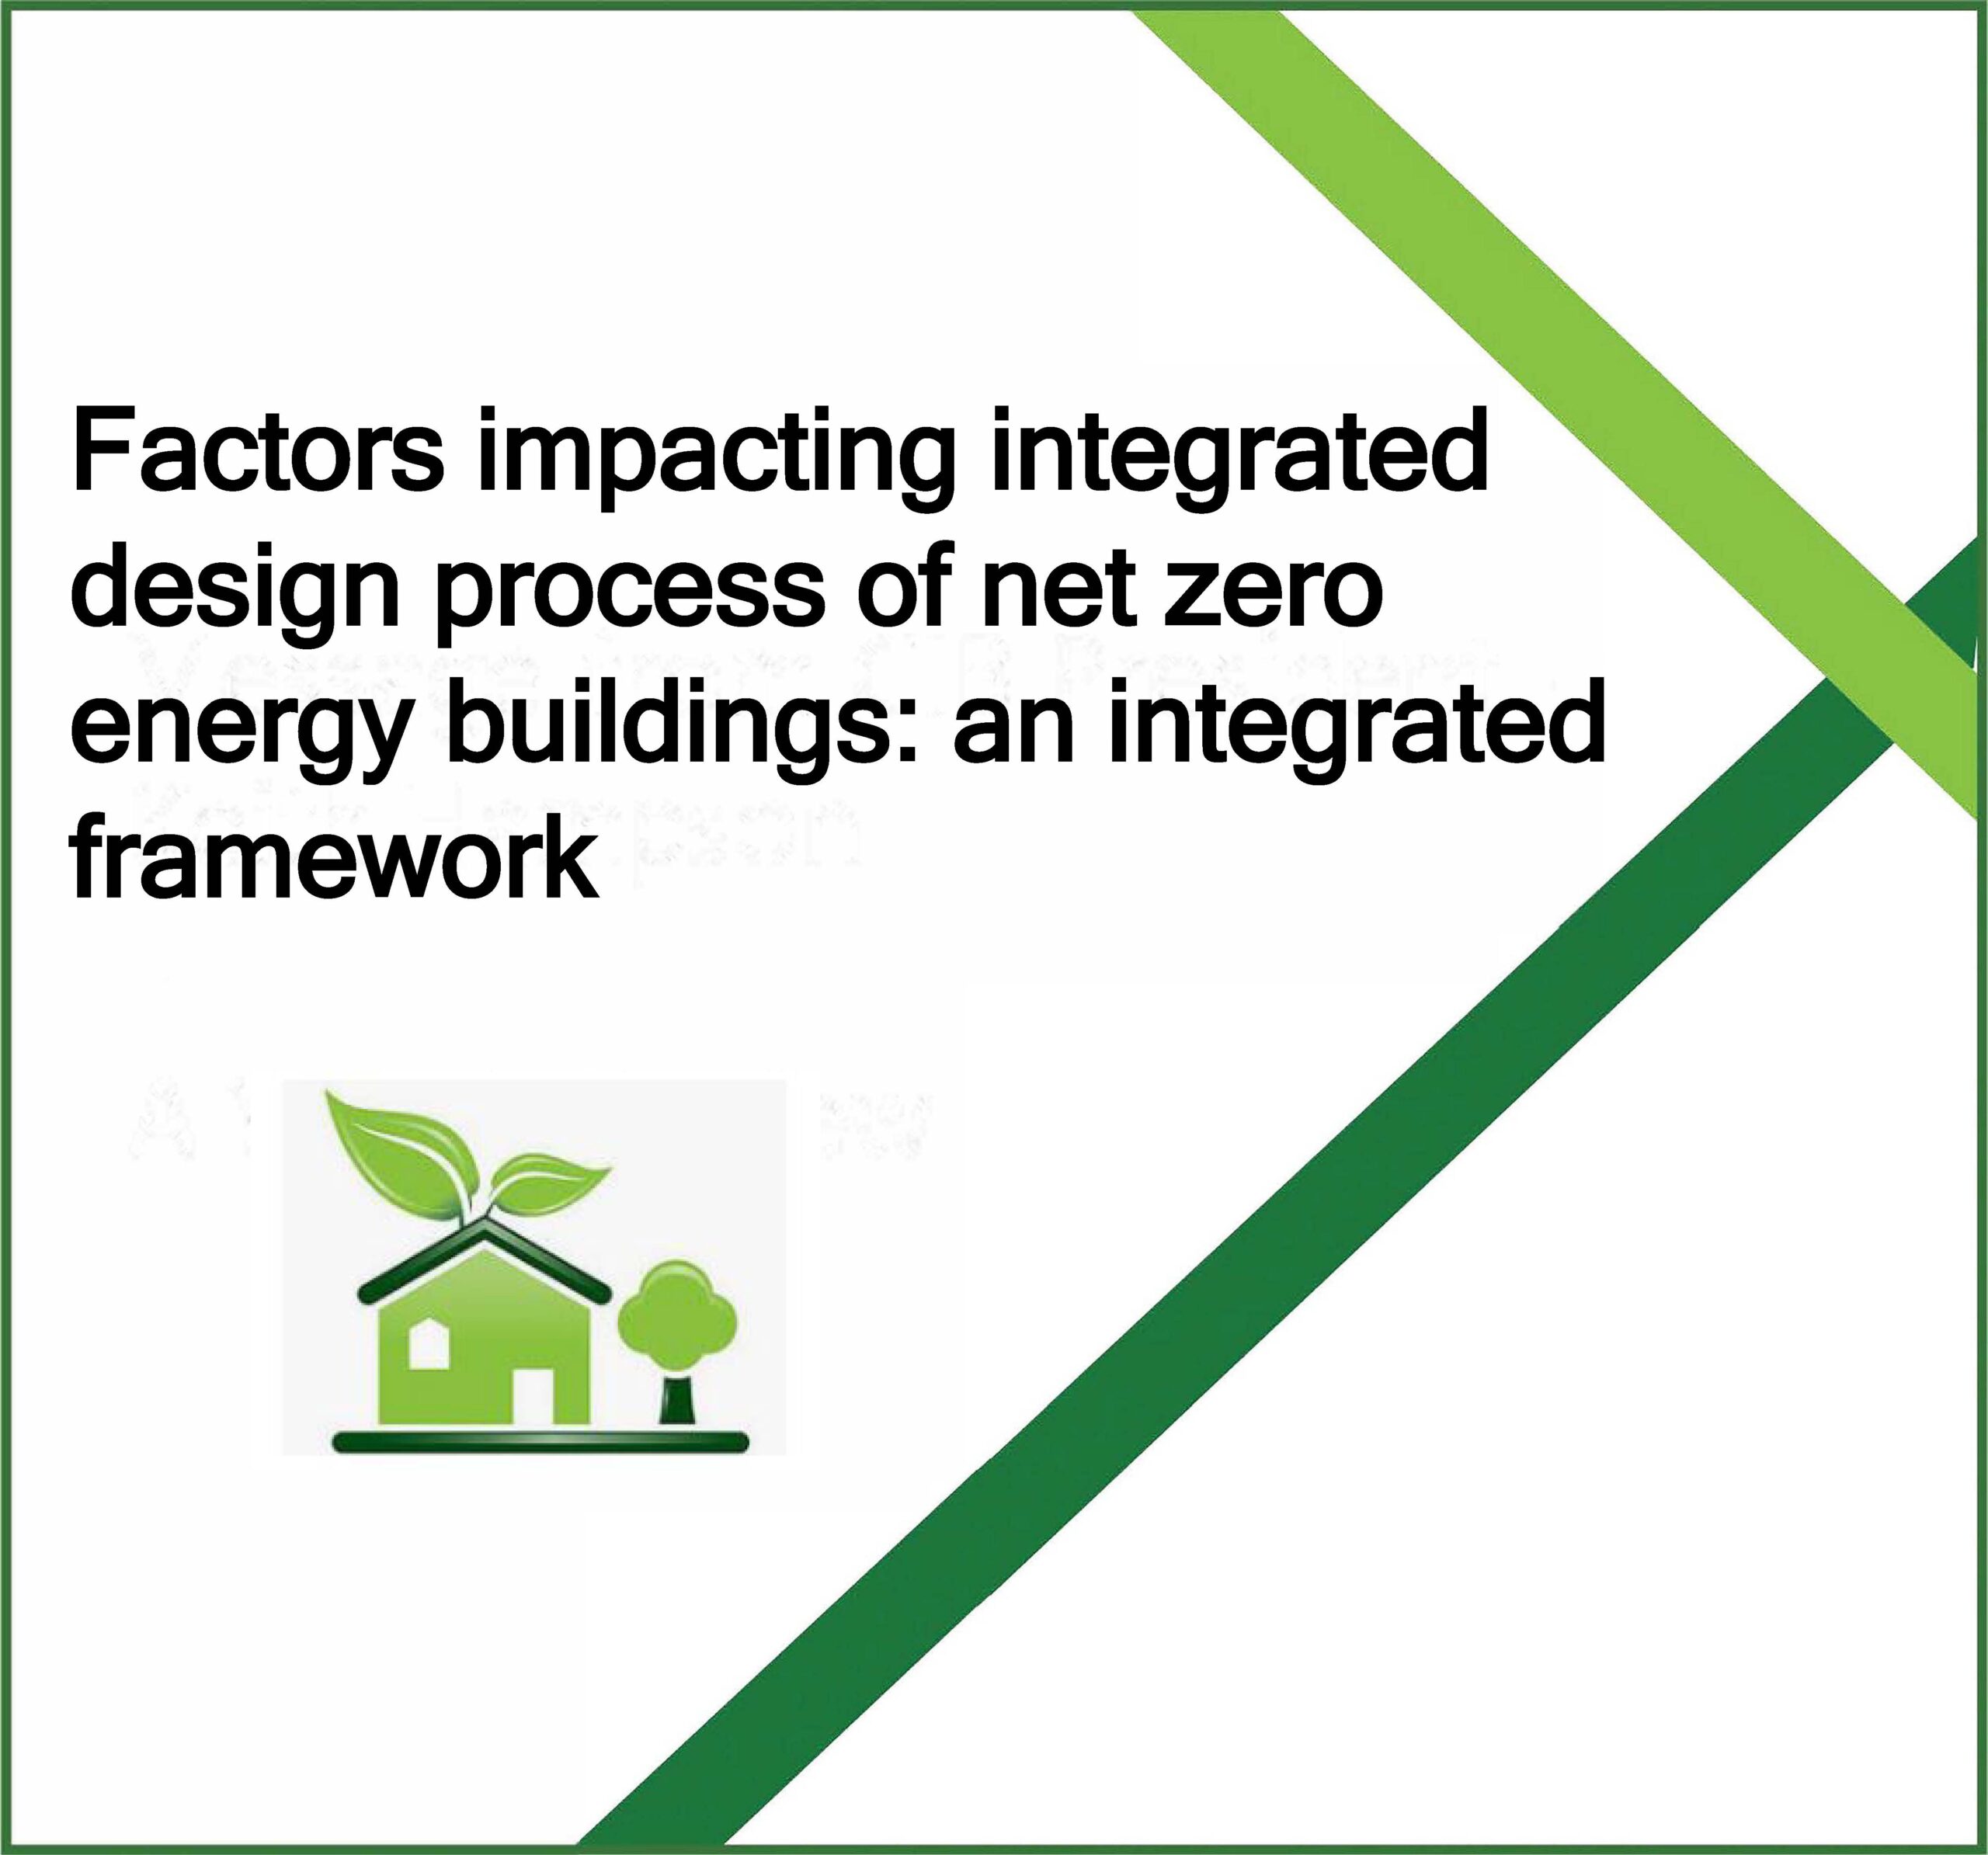 Feature Article: Factors impacting integrated design process of net zero energy buildings: an integrated framework